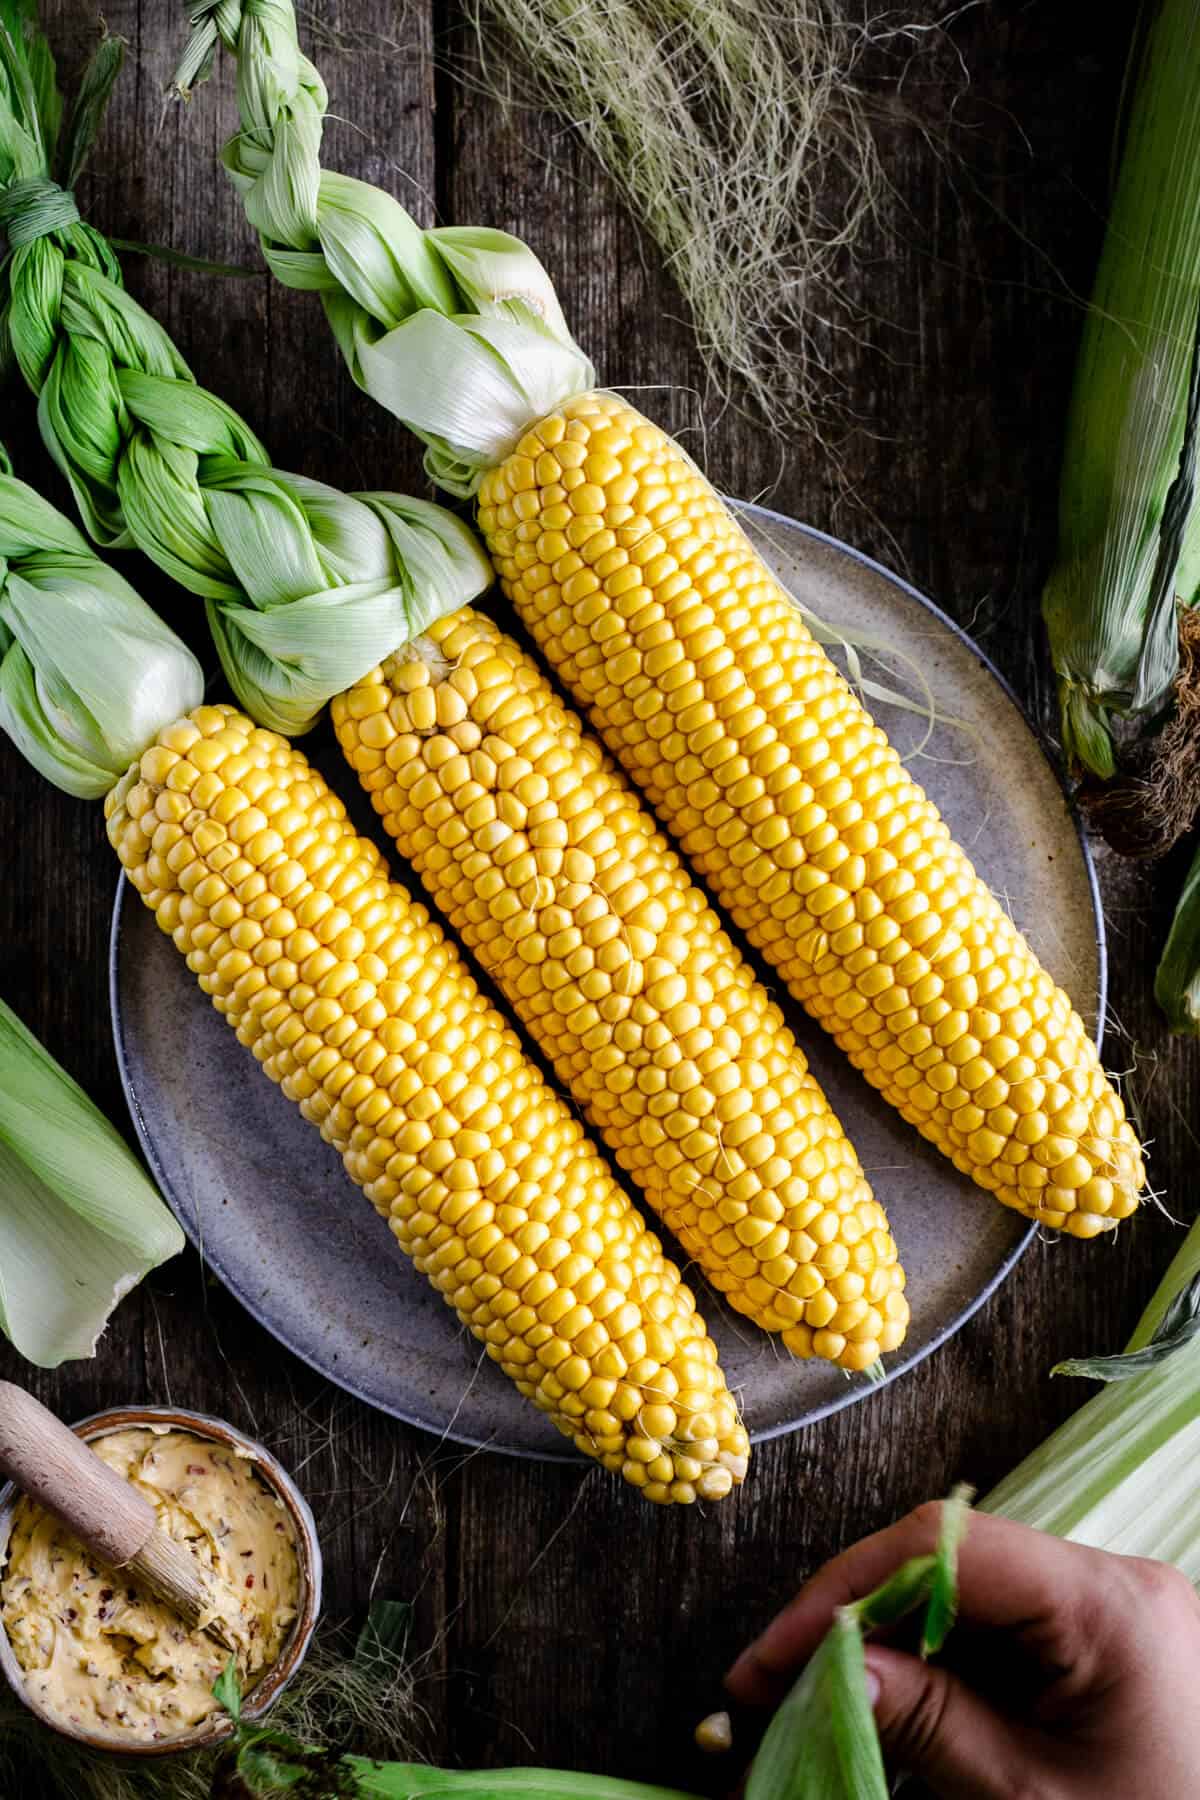 Three fresh cobs of corn on the plate